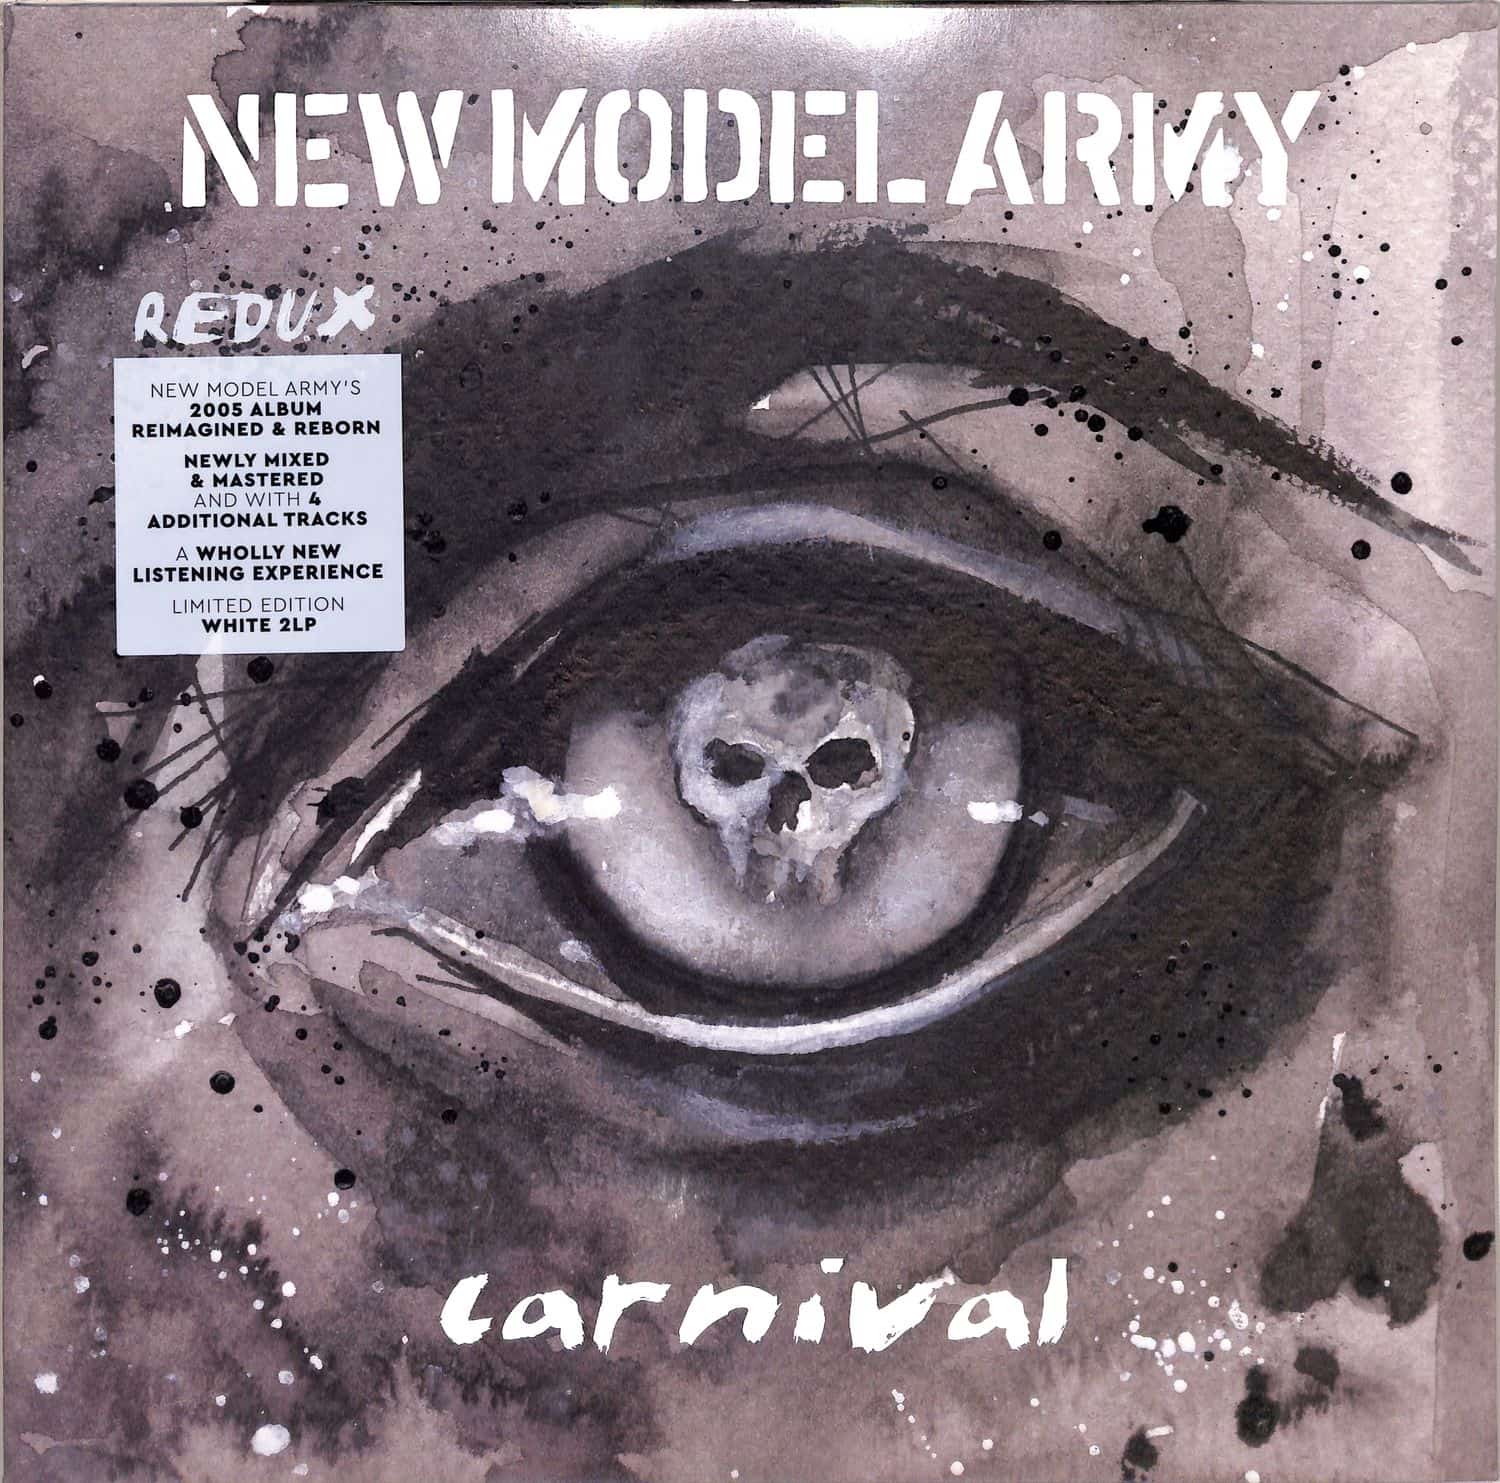 New Model Army - CARNIVAL 